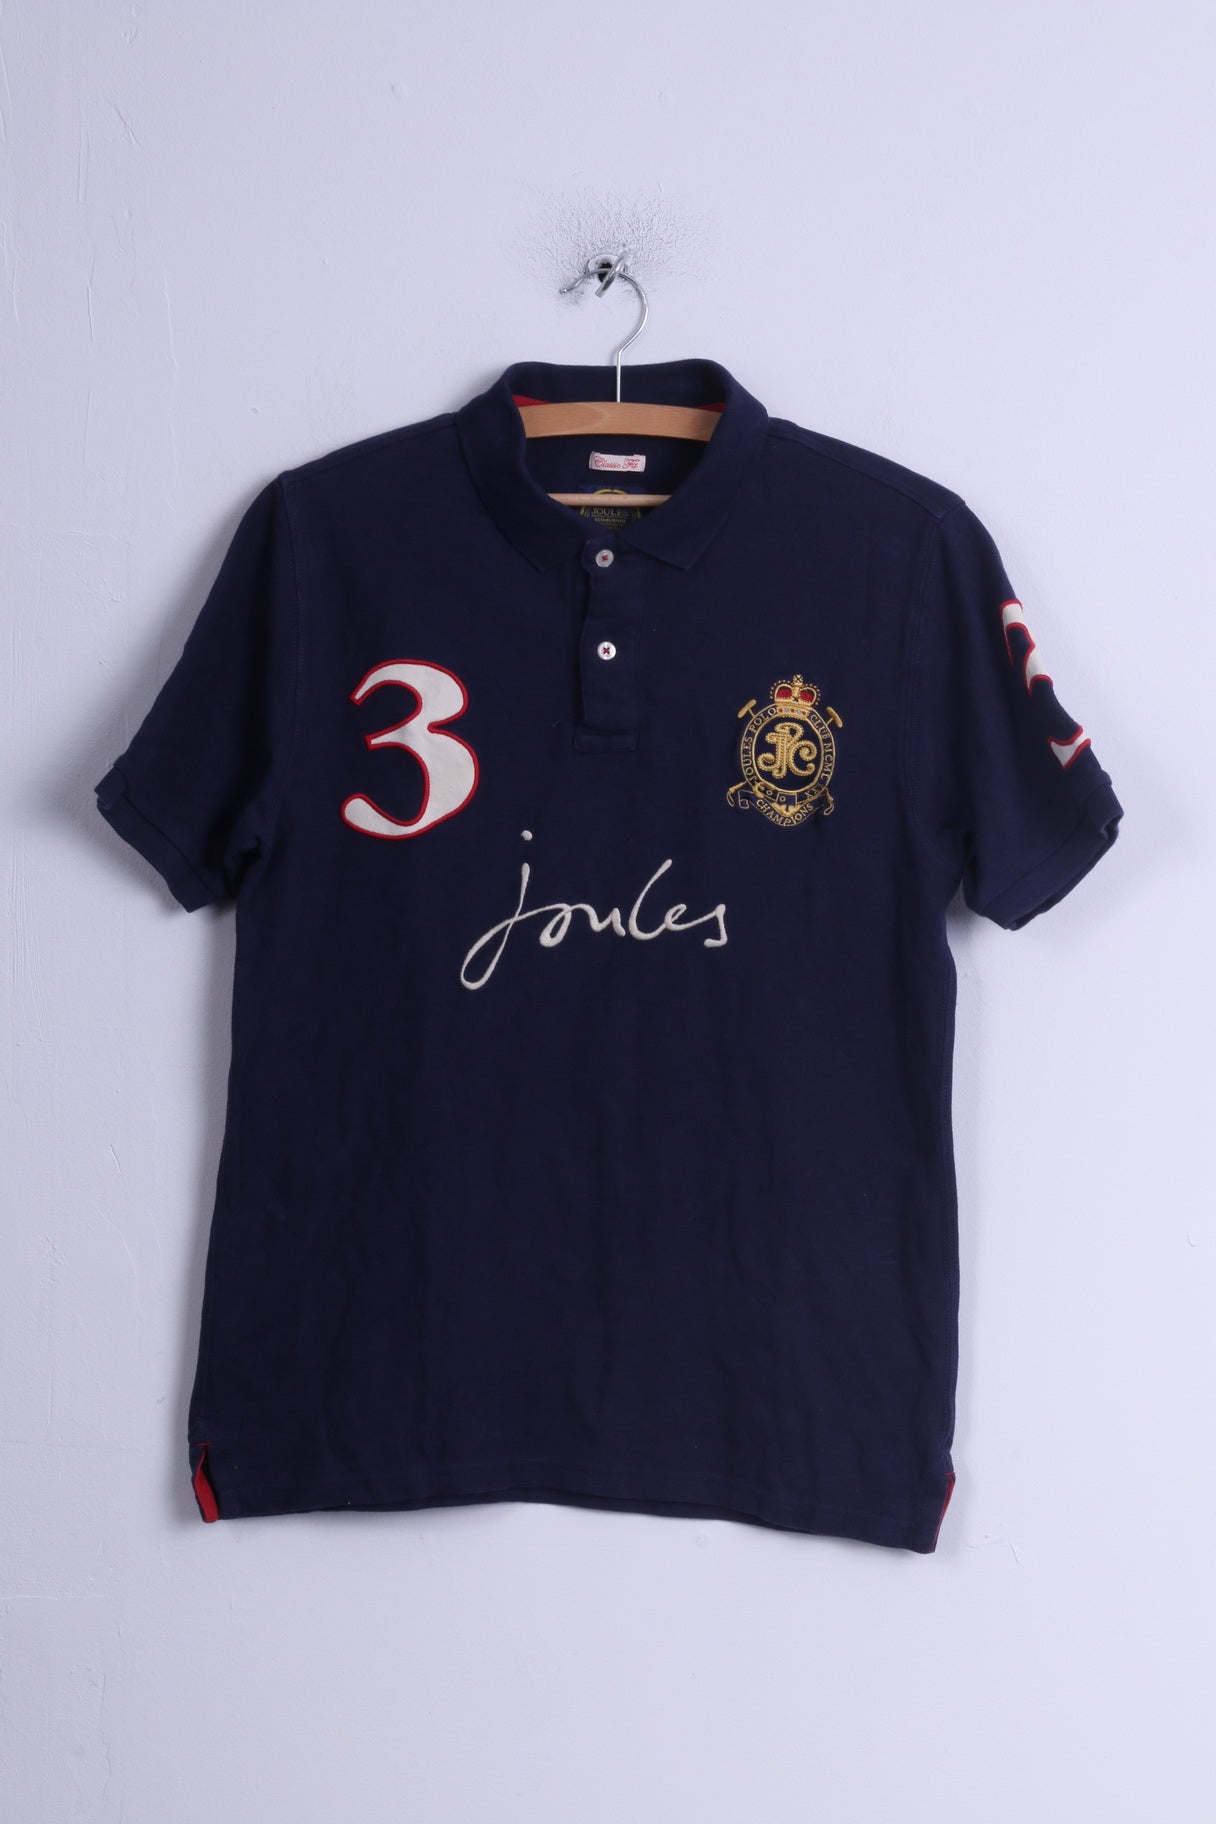 Joules Mens S Polo Shirt Navy Classic Fit Joules Polo Club #3 Cotton